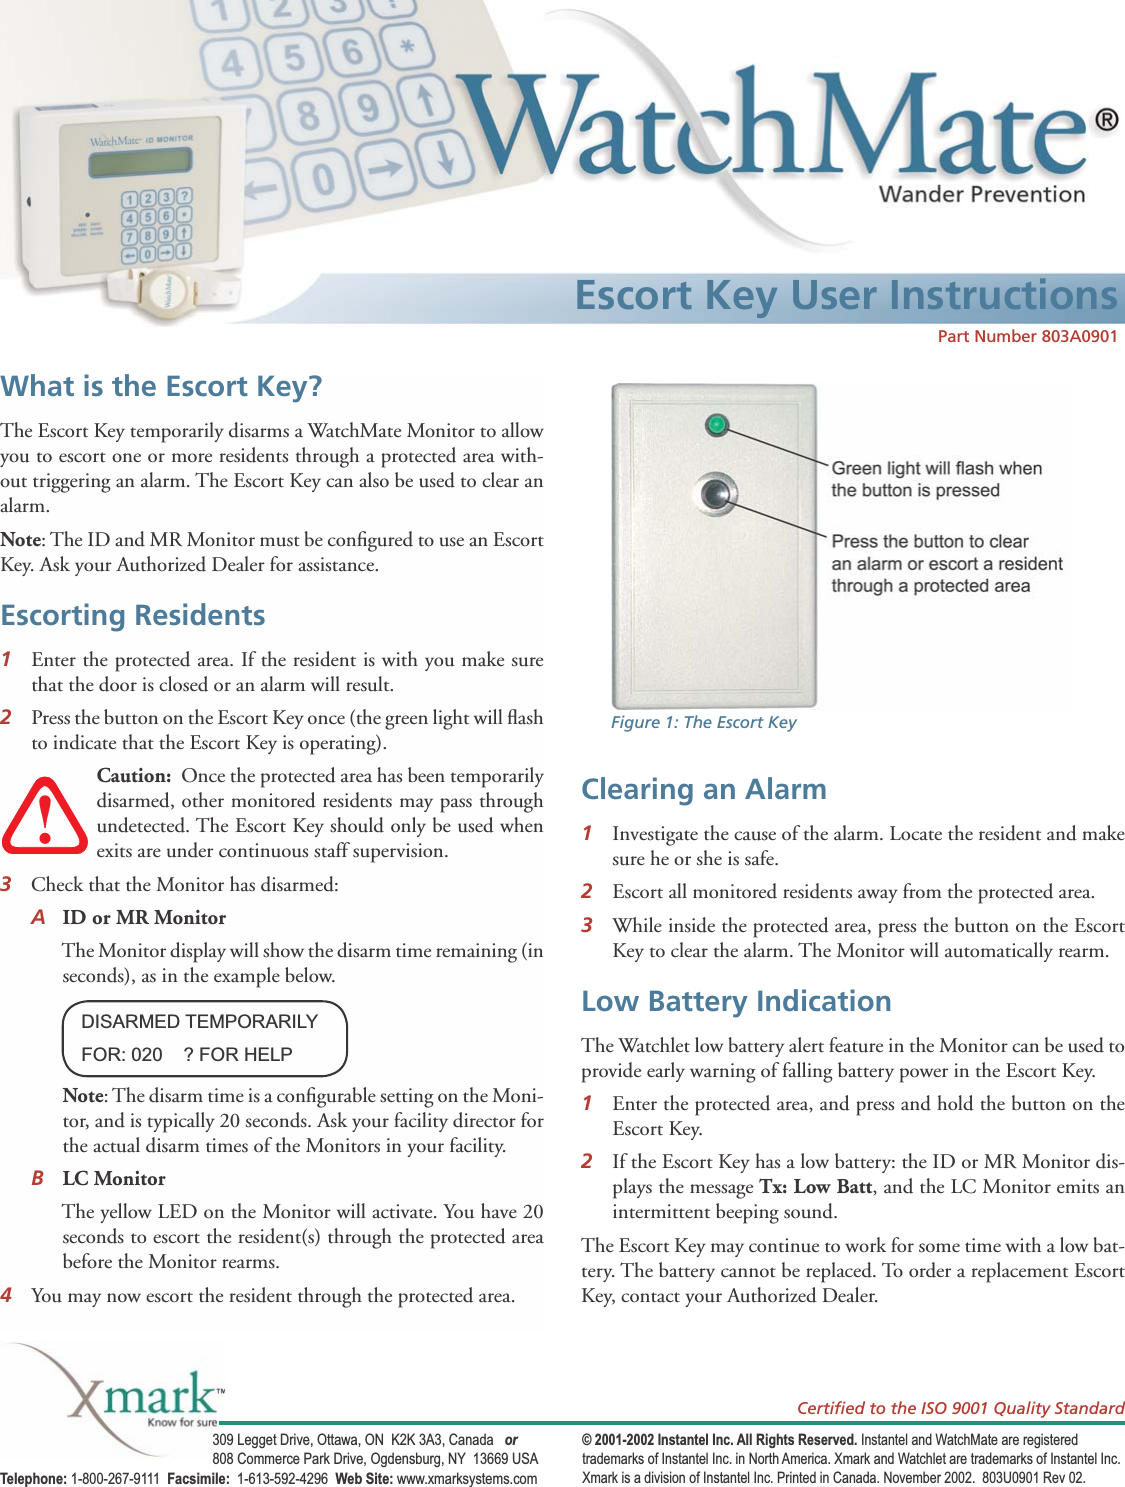 Escort Key User Instructions309 Legget Drive, Ottawa, ON  K2K 3A3, Canada   or 808 Commerce Park Drive, Ogdensburg, NY  13669 USATelephone: 1-800-267-9111  Facsimile:  1-613-592-4296  Web Site: www.xmarksystems.com© 2001-2002 Instantel Inc. All Rights Reserved. Instantel and WatchMate are registered trademarks of Instantel Inc. in North America. Xmark and Watchlet are trademarks of Instantel Inc. Xmark is a division of Instantel Inc. Printed in Canada. November 2002.  803U0901 Rev 02.Certiﬁ ed to the ISO 9001 Quality StandardWhat is the Escort Key?The Escort Key temporarily disarms a WatchMate Monitor to allow you to escort one or more residents through a protected area with-out triggering an alarm. The Escort Key can also be used to clear an alarm. Note: The ID and MR Monitor must be conﬁ gured to use an Escort Key. Ask your Authorized Dealer for assistance.Escorting Residents 1  Enter the protected area. If the resident is with you make sure that the door is closed or an alarm will result.2   Press the button on the Escort Key once (the green light will ﬂ ash to indicate that the Escort Key is operating). Caution:  Once the protected area has been temporarily disarmed, other monitored residents may pass through undetected. The Escort Key should only be used when exits are under continuous staff supervision.3   Check that the Monitor has disarmed: A ID or MR Monitor  The Monitor display will show the disarm time remaining (in seconds), as in the example below.  Note: The disarm time is a conﬁ gurable setting on the Moni-tor, and is typically 20 seconds. Ask your facility director for the actual disarm times of the Monitors in your facility. B LC Monitor  The yellow LED on the Monitor will activate. You have 20 seconds to escort the resident(s) through the protected area before the Monitor rearms.4  You may now escort the resident through the protected area. Clearing an Alarm 1  Investigate the cause of the alarm. Locate the resident and make sure he or she is safe.  2   Escort all monitored residents away from the protected area. 3   While inside the protected area, press the button on the Escort Key to clear the alarm. The Monitor will automatically rearm.Low Battery IndicationThe Watchlet low battery alert feature in the Monitor can be used to provide early warning of falling battery power in the Escort Key.  1  Enter the protected area, and press and hold the button on the Escort Key.  2  If the Escort Key has a low battery: the ID or MR Monitor dis-plays the message Tx: Low Batt, and the LC Monitor emits an intermittent beeping sound. The Escort Key may continue to work for some time with a low bat-tery. The battery cannot be replaced. To order a replacement Escort Key, contact your Authorized Dealer. DISARMED TEMPORARILYFOR: 020    ? FOR HELP!Figure 1: The Escort KeyPart Number 803A0901 